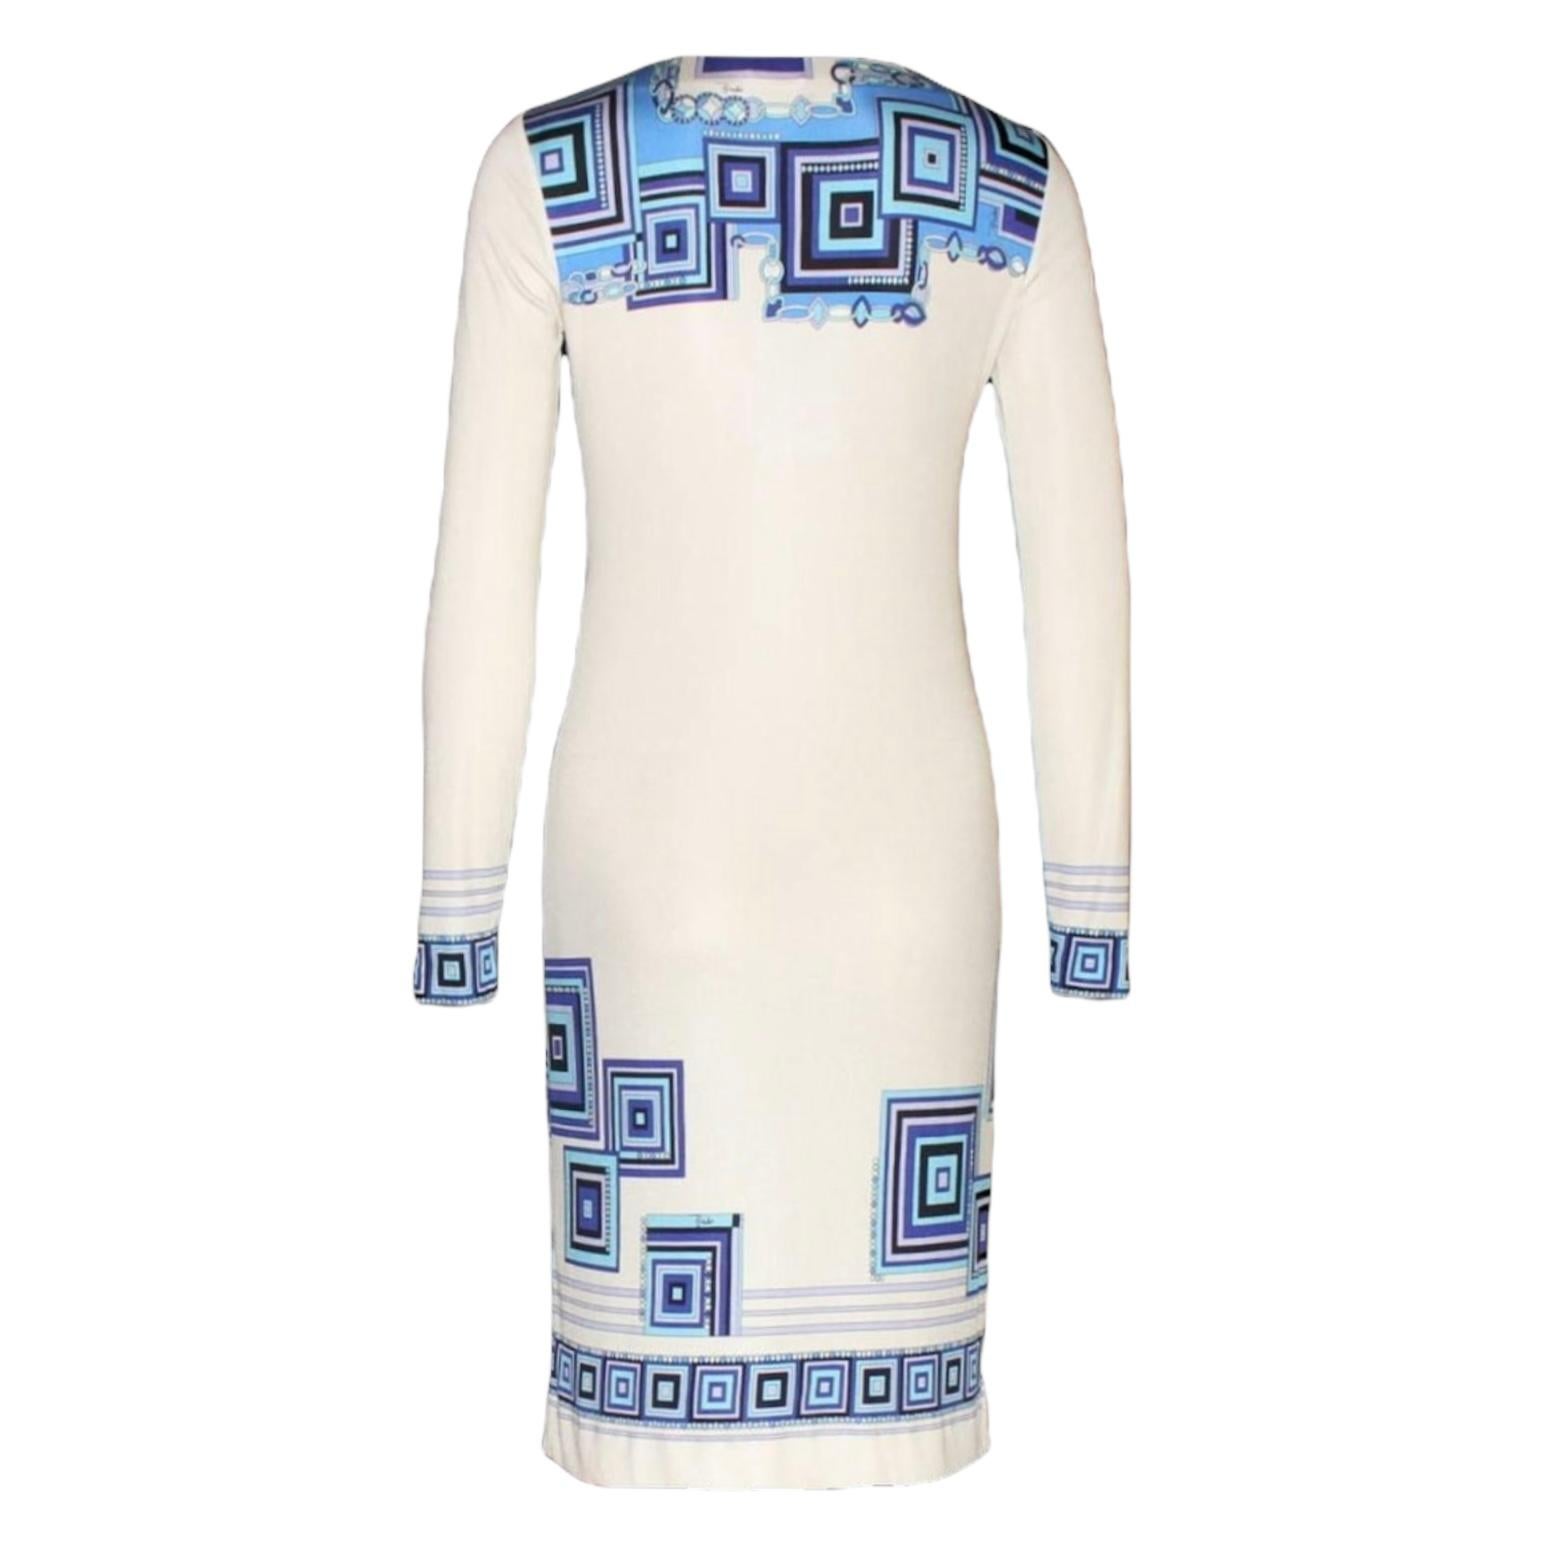 UNWORN Emilio Pucci Whites & Blues Signature Print Silk Dress with Belt 48 In Excellent Condition For Sale In Switzerland, CH